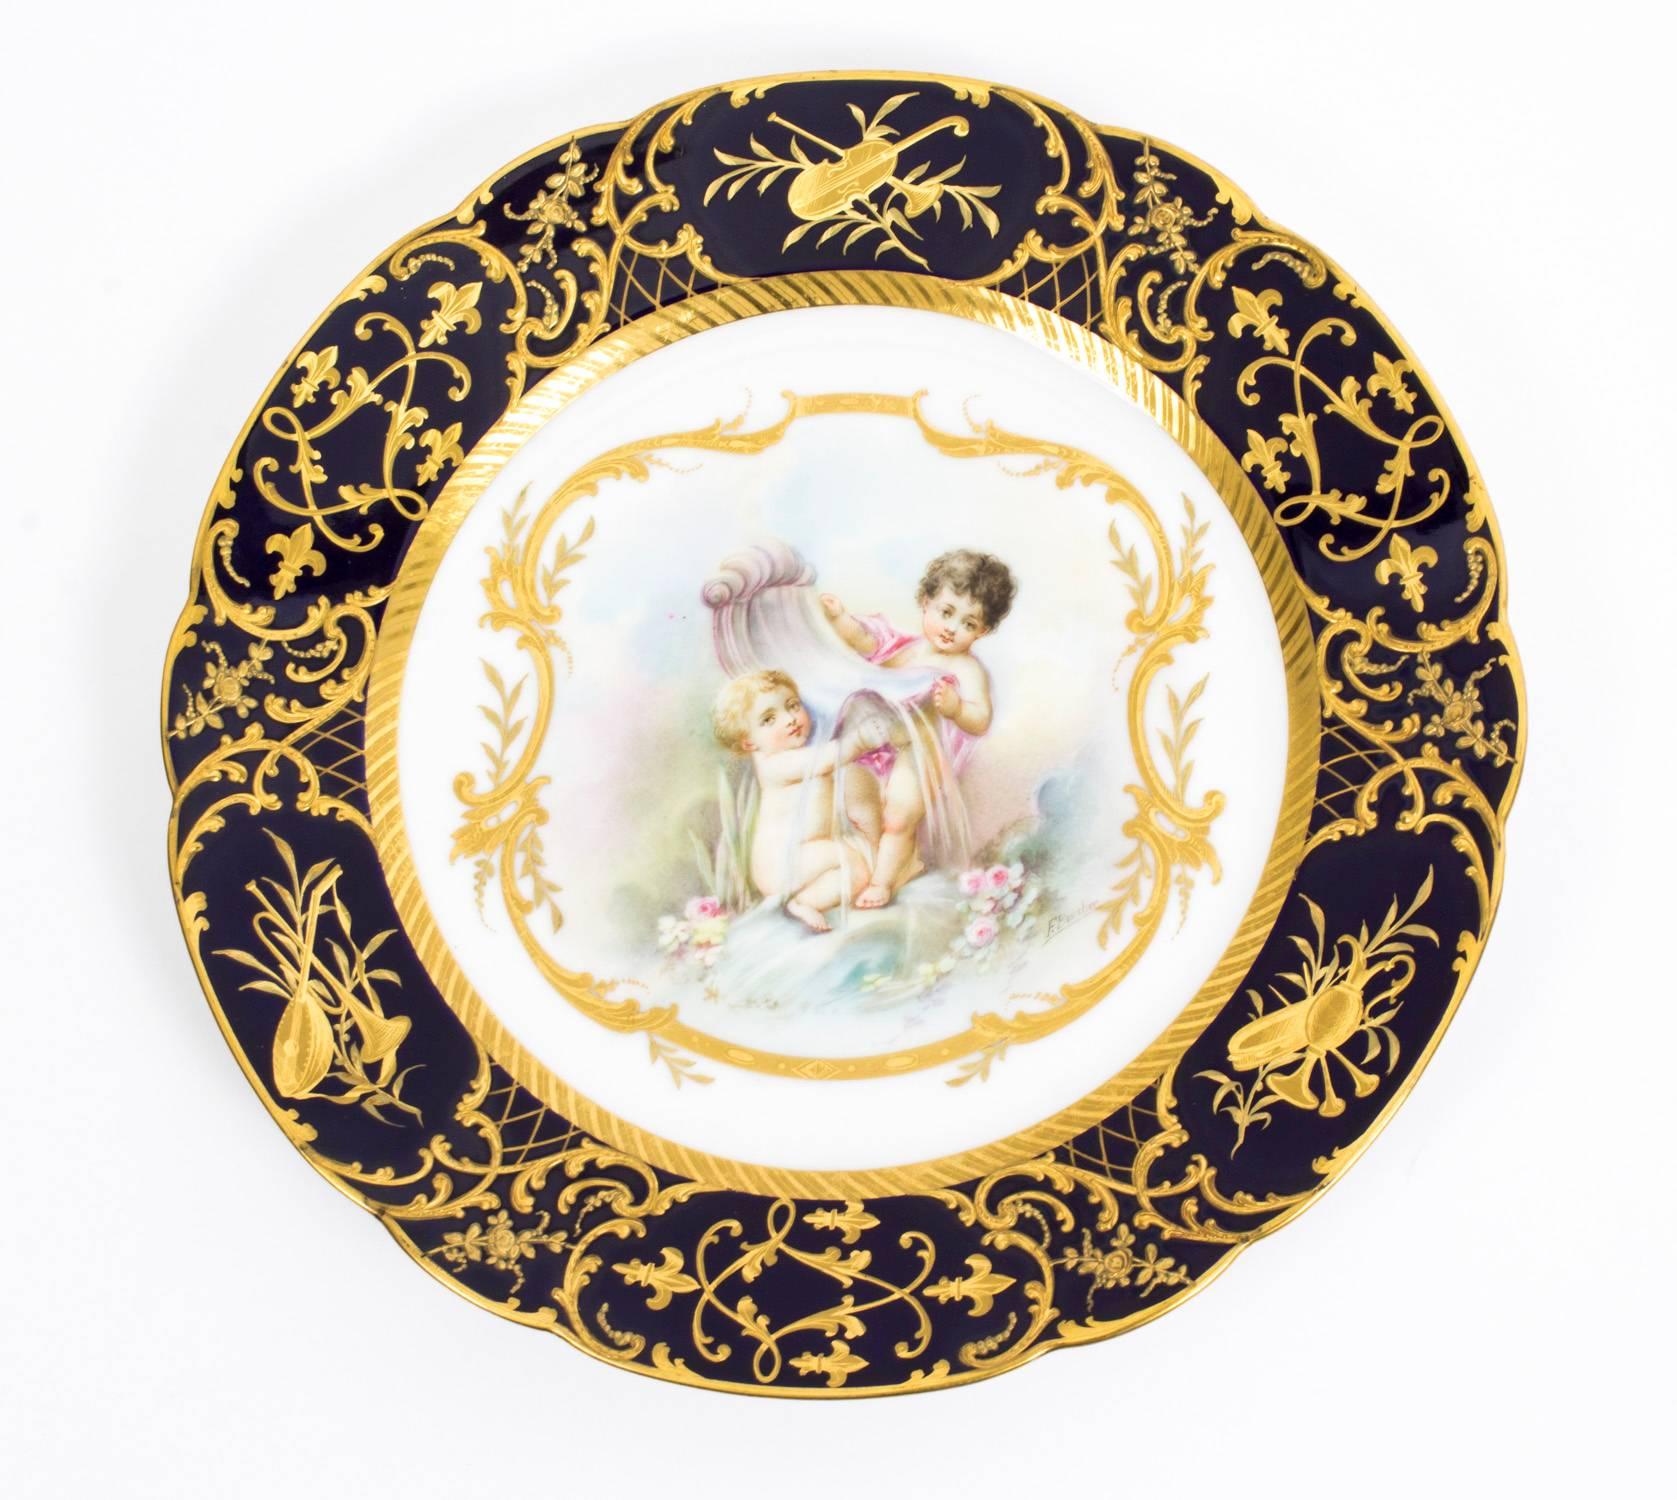 This is an absolutely fabulous and decorative antique pair of Sevres style porcelain cabinet plates, signed F.Boucher, circa 1900 in date.

Both beautifully painted with amorini with raised gilt and Bleu du Roi borders.

The plates bear the the